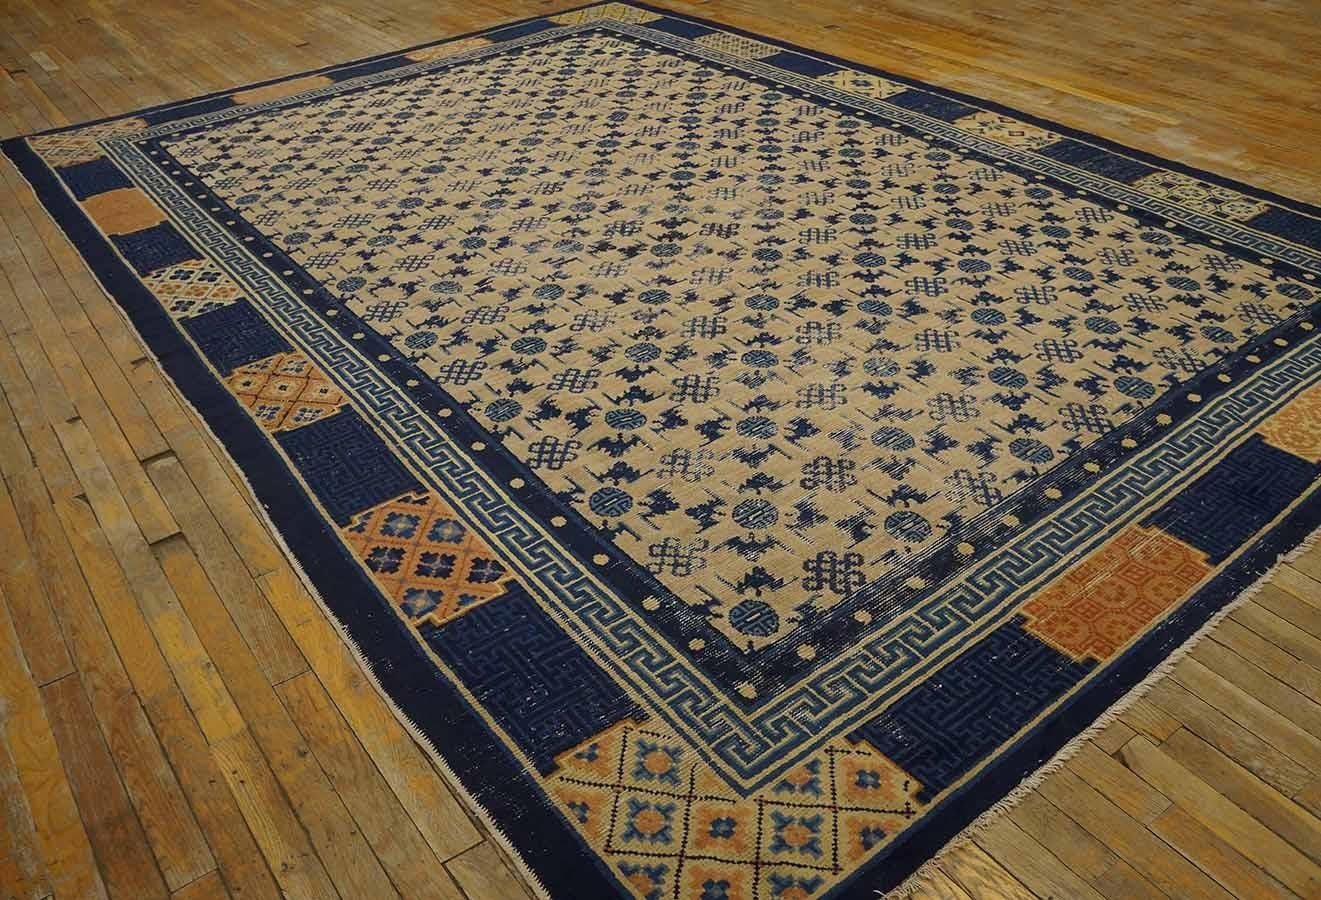 The creamy ivory ground of this northern Chinese carpet is decorated with an all-over design of bats, “shou” symbols and knots, within a cartouche border of textile patterns and an inner T-fret stripe. The iconography is that of good luck and long